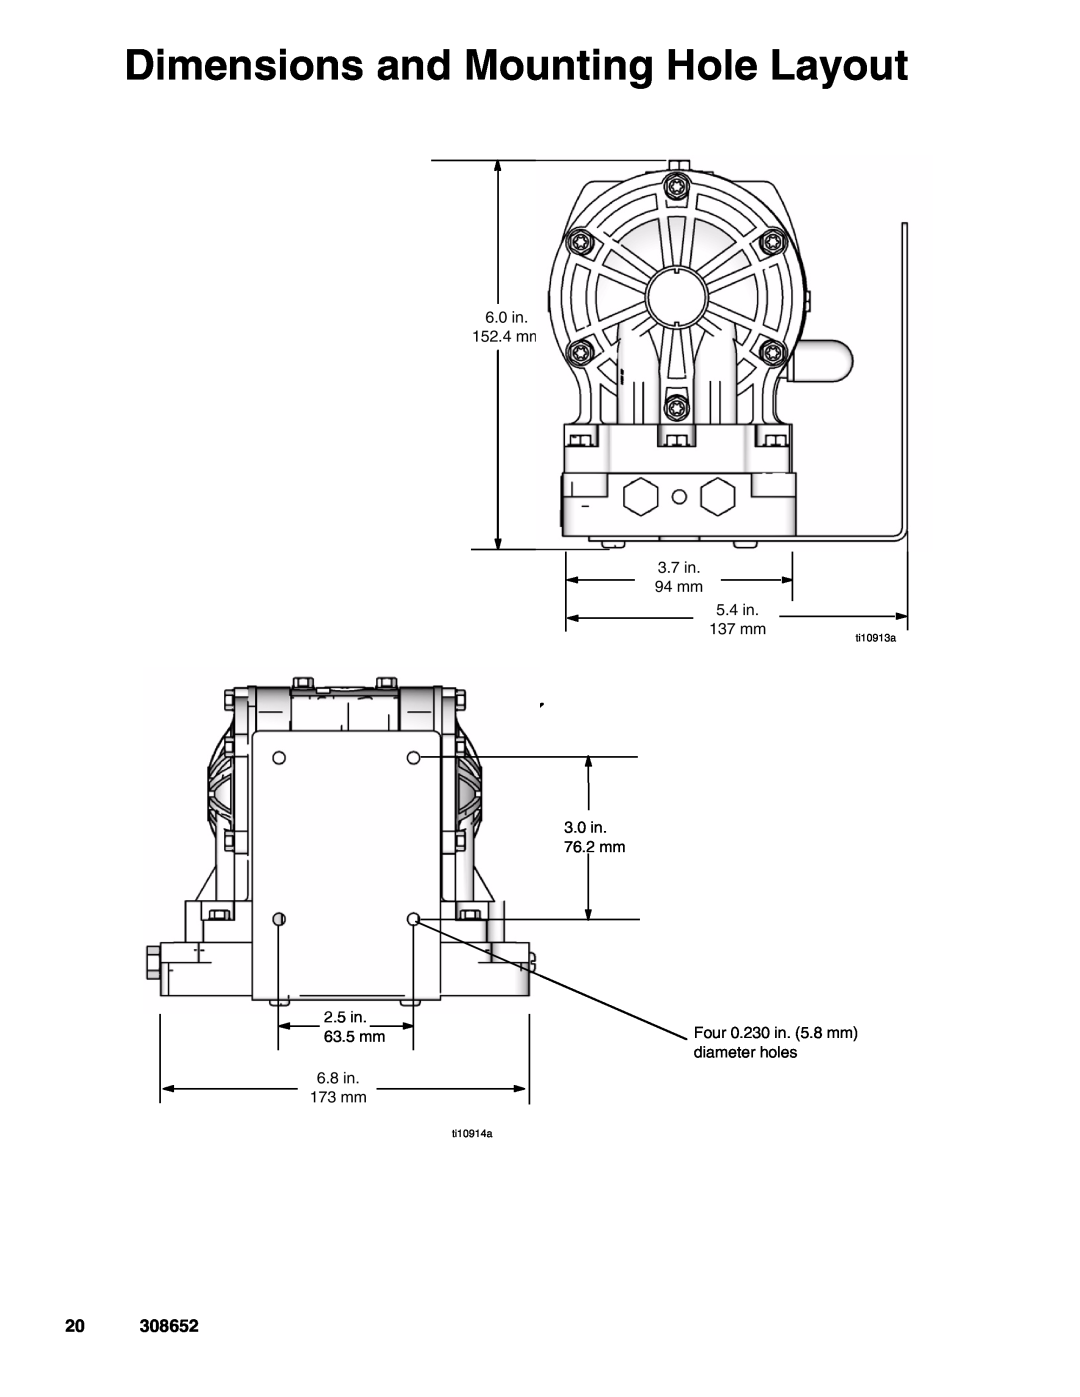 Graco 308652Y Dimensions and Mounting Hole Layout, 6.0 in 152.4 mm, Four 0.281 in 7.137 mm diameter holes 2.5 in, ti10913a 